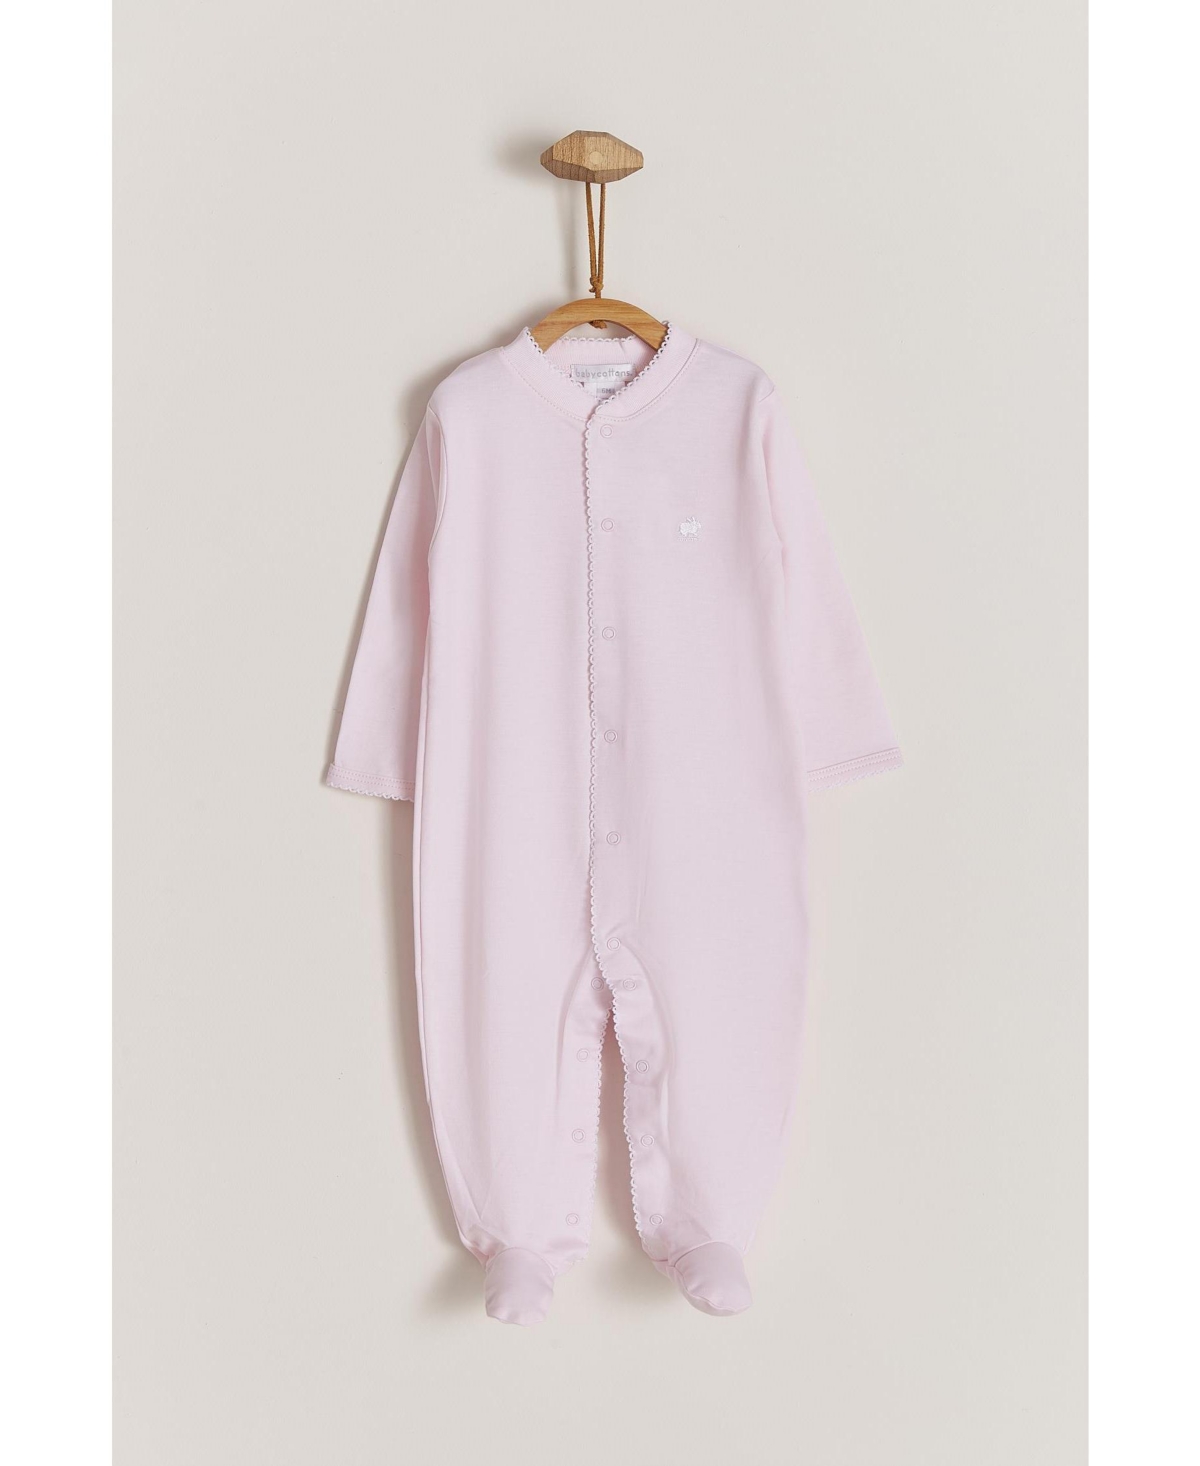 Babycottons Girls Premium Softest Peruvian Pima Cotton In The Woods Pink Zipper Footed Pajama For In